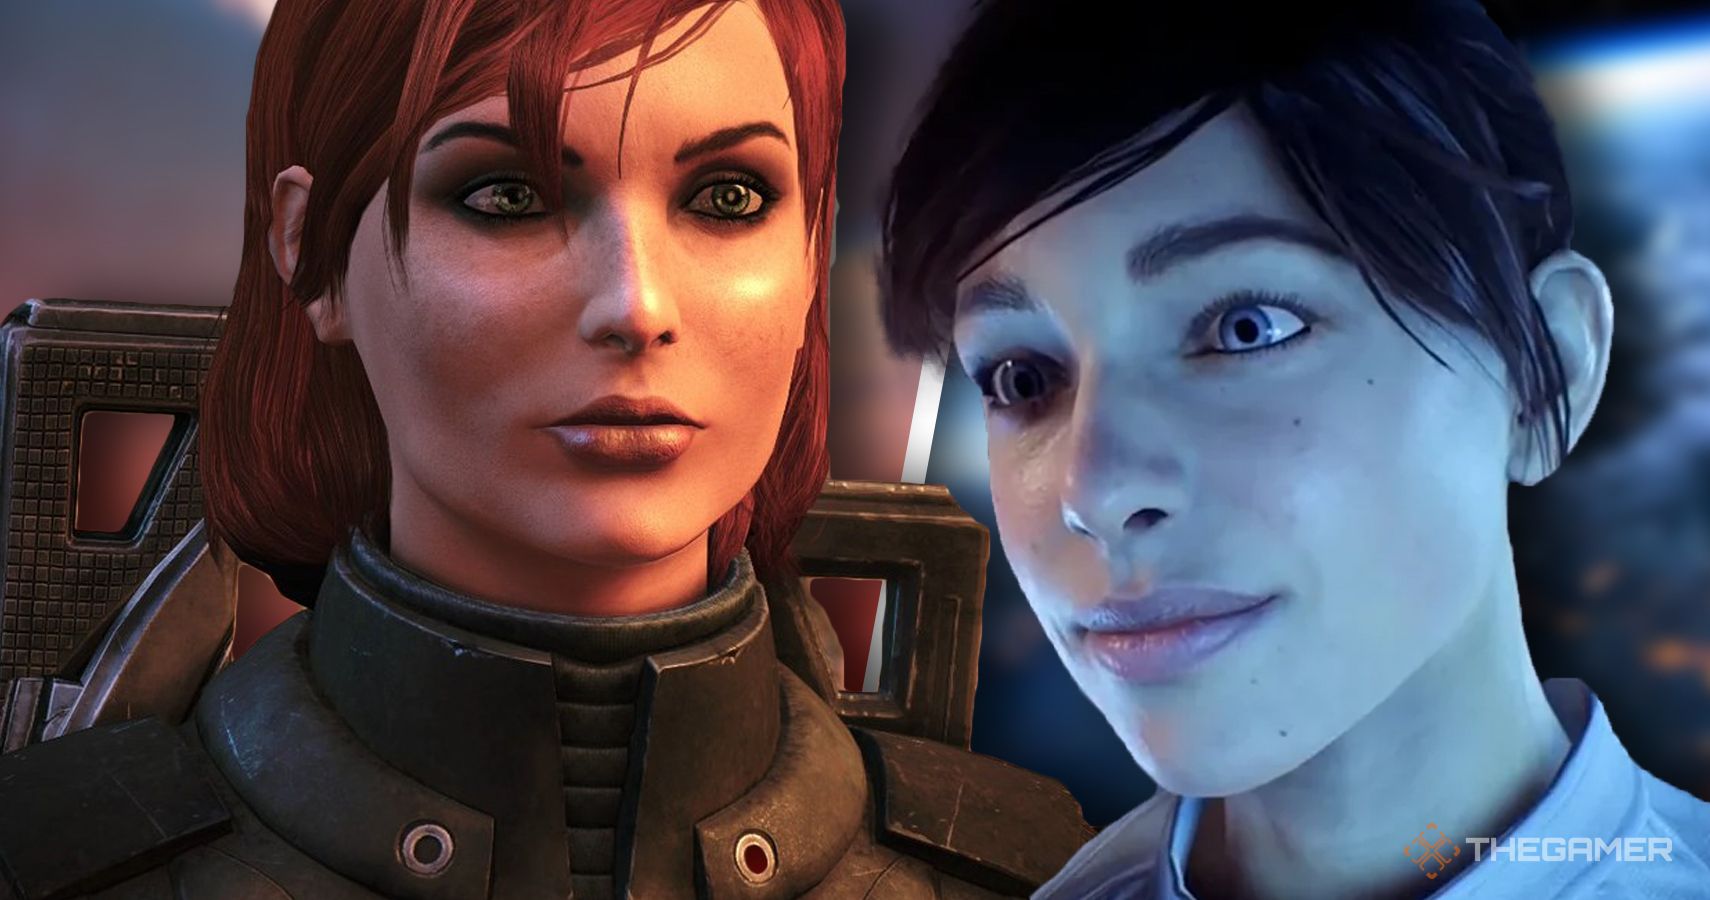 Mass Effect Andromedas Ryder Is More Relatable Than Shepard Ever Was